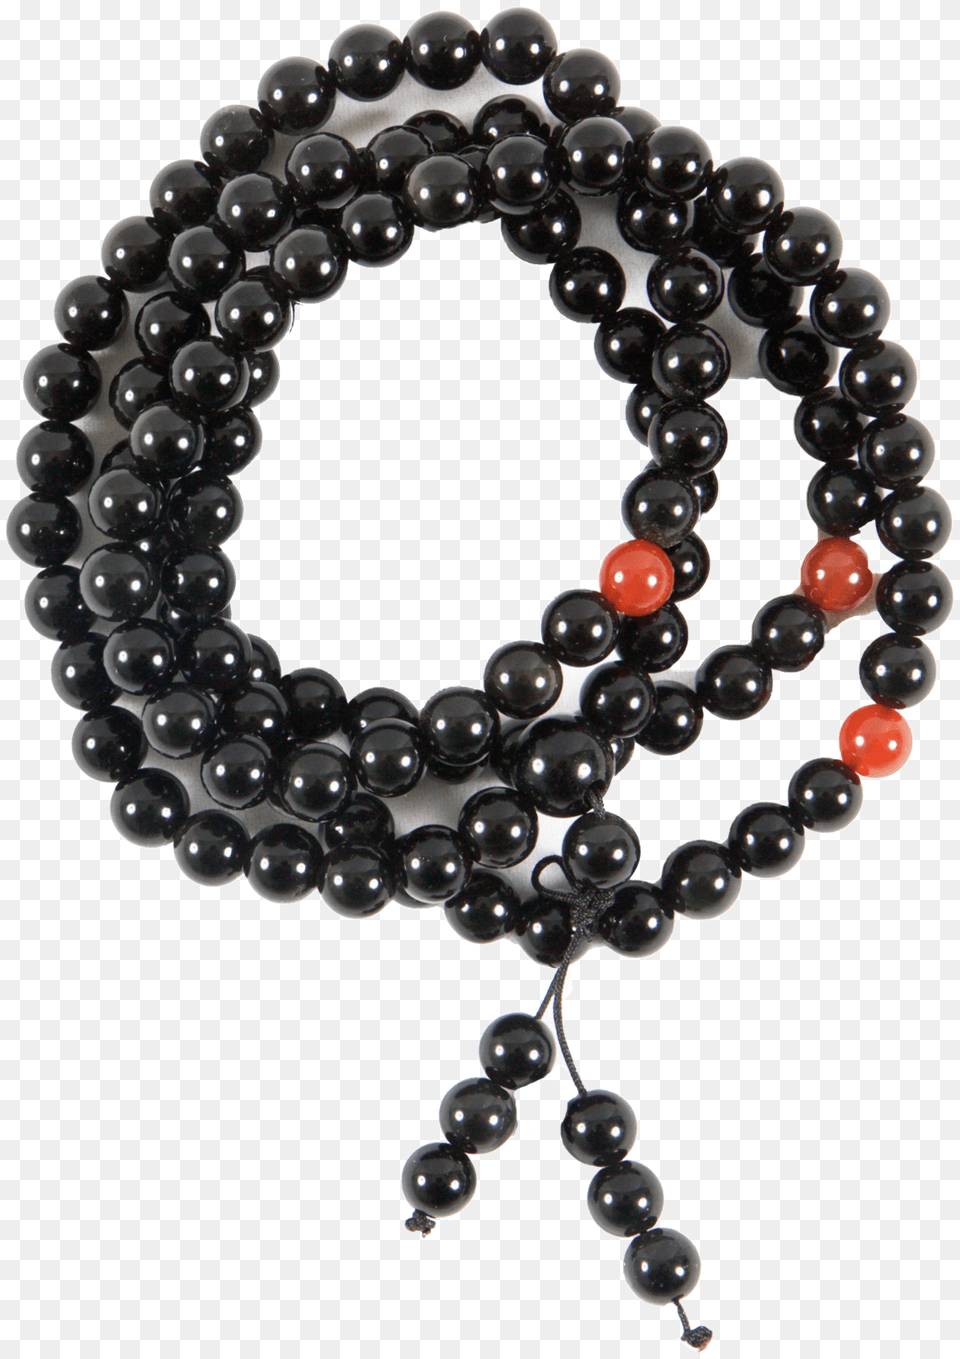 Mala Beads Necklace Obsidian Bead, Accessories, Bead Necklace, Jewelry, Ornament Png